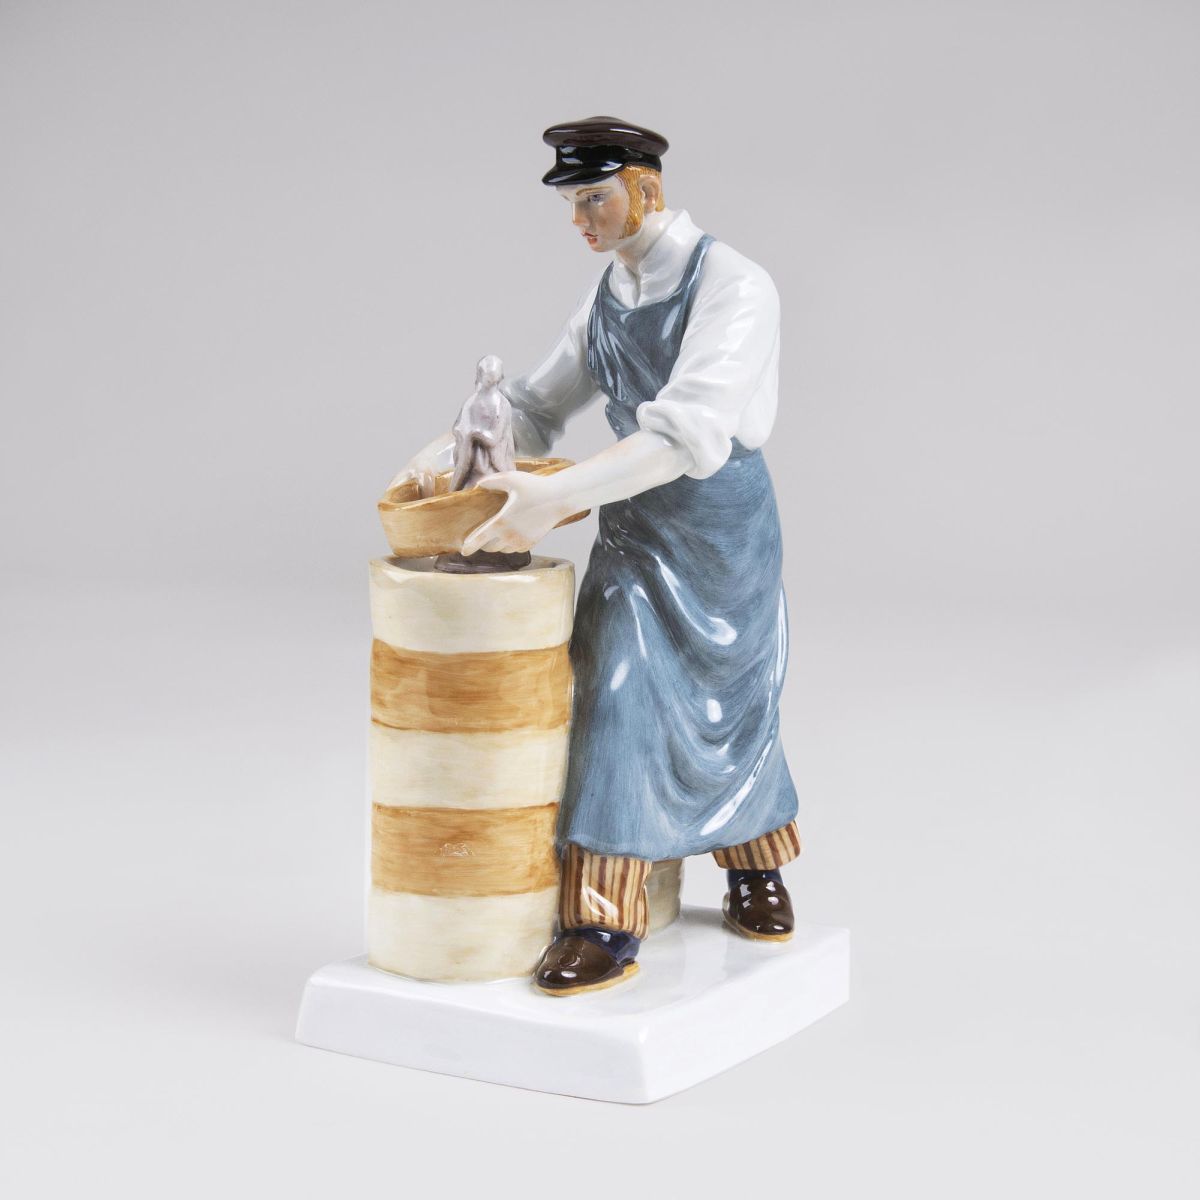 A Figure 'Capsule Setter in the Manufacture of Porcelain'